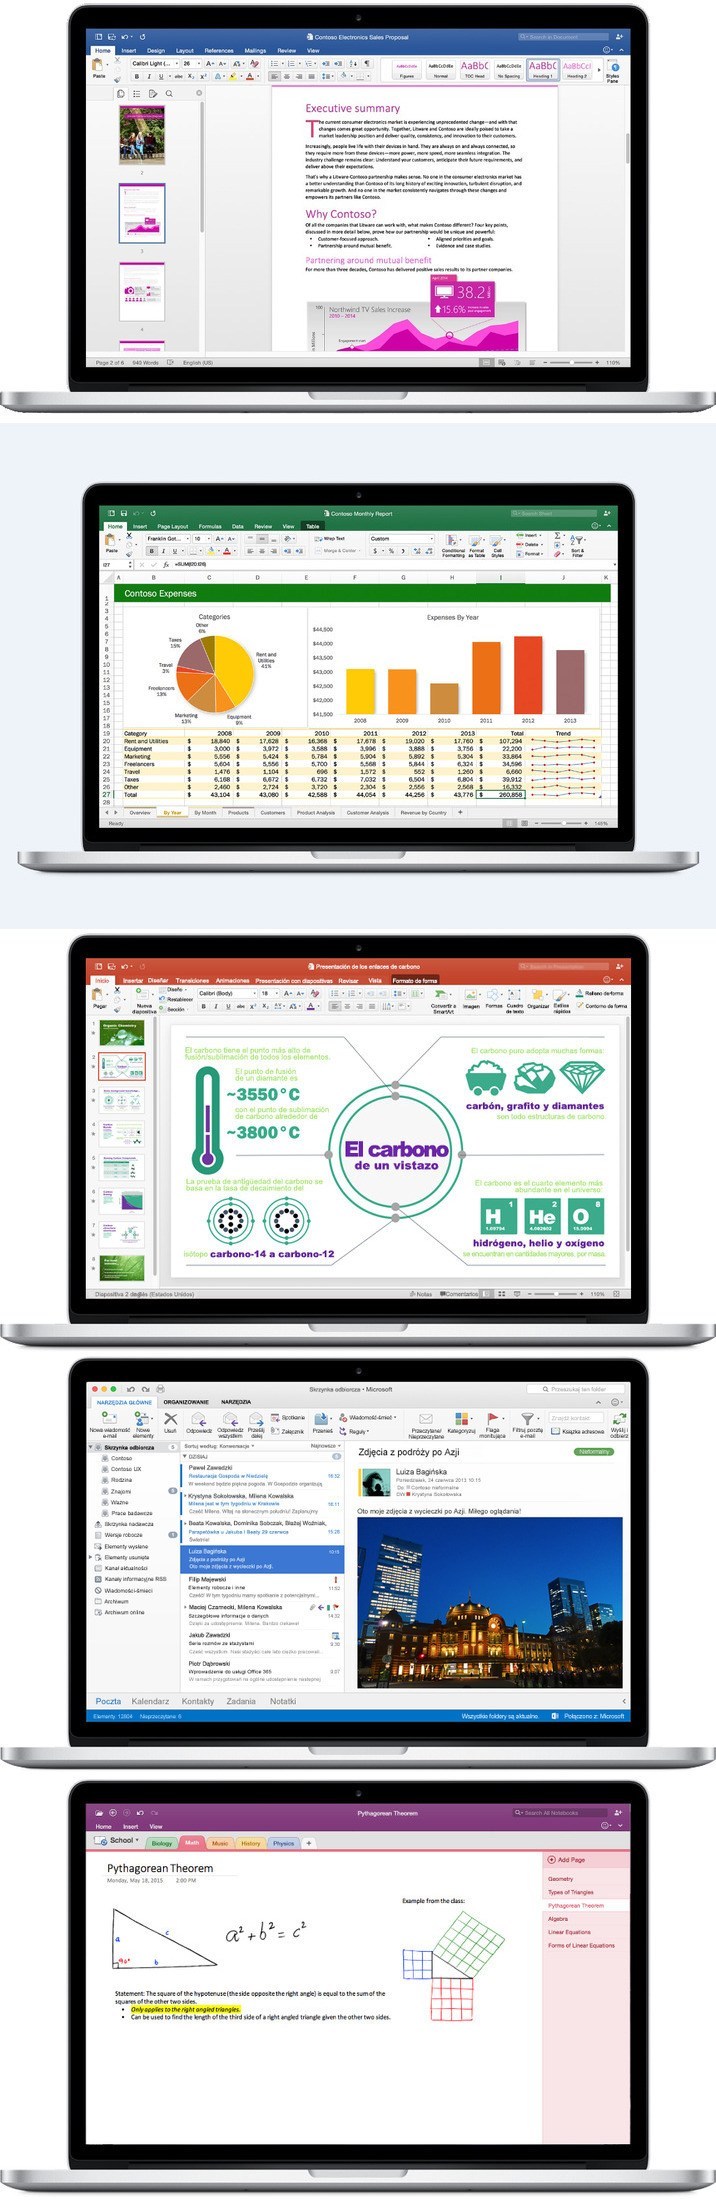 microsoft office for mac free torrent